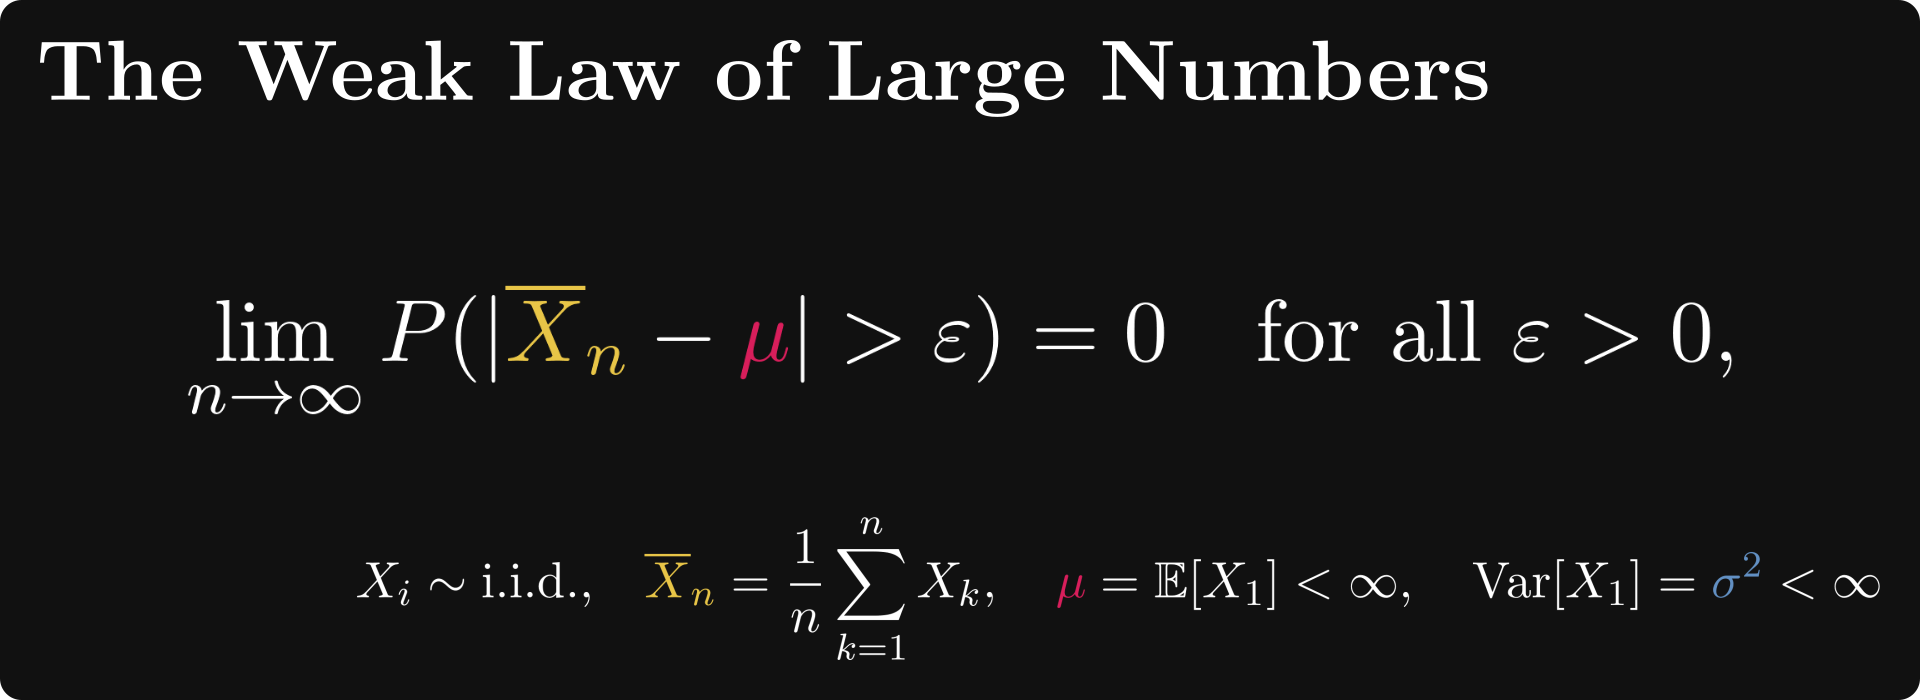 How large that number in the Law of Large Numbers is?